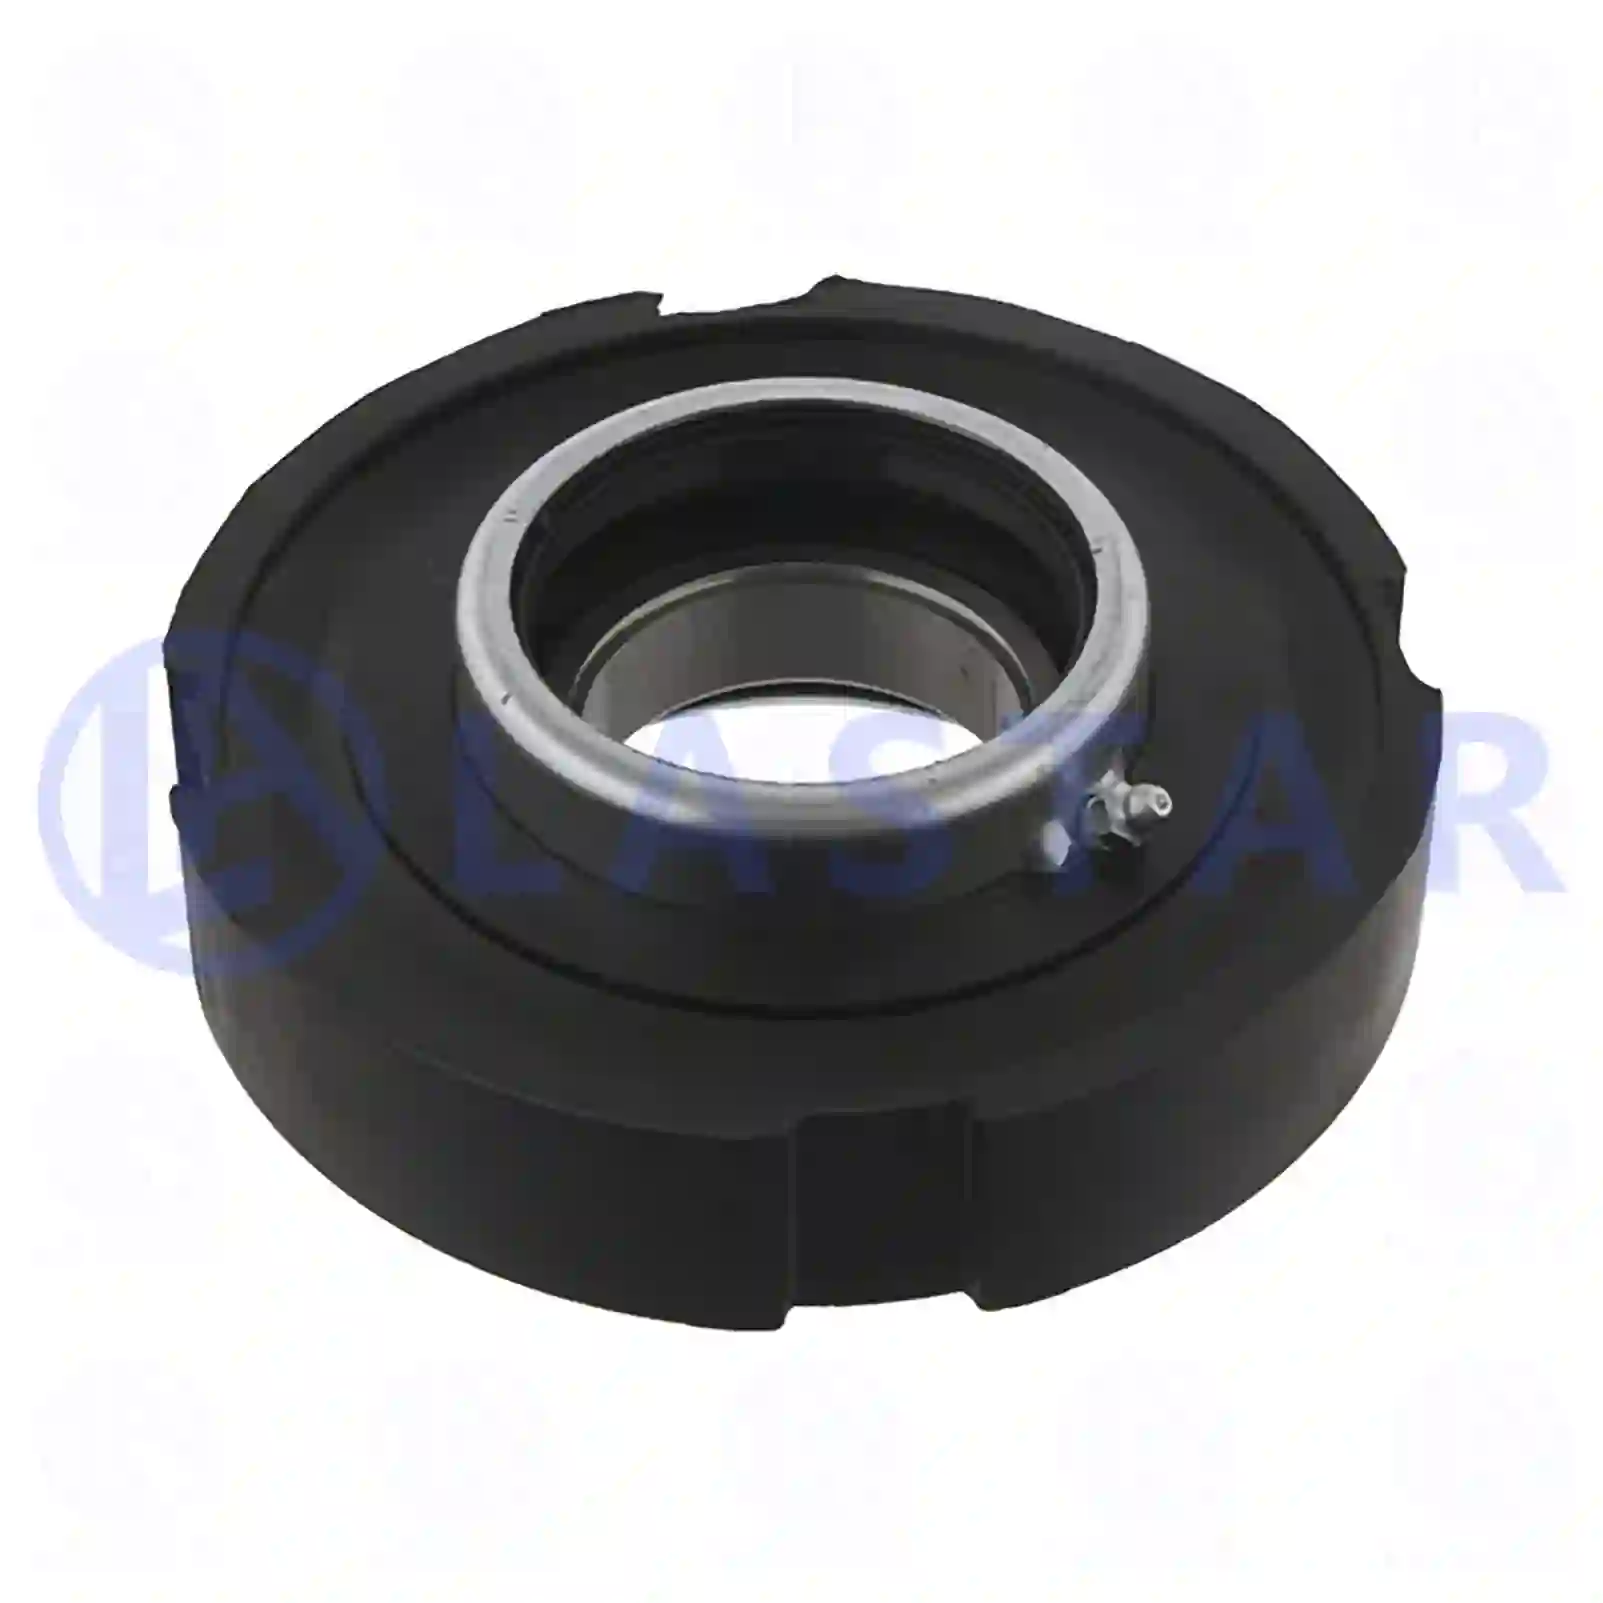 Center bearing, complete, 77734250, 294270 ||  77734250 Lastar Spare Part | Truck Spare Parts, Auotomotive Spare Parts Center bearing, complete, 77734250, 294270 ||  77734250 Lastar Spare Part | Truck Spare Parts, Auotomotive Spare Parts